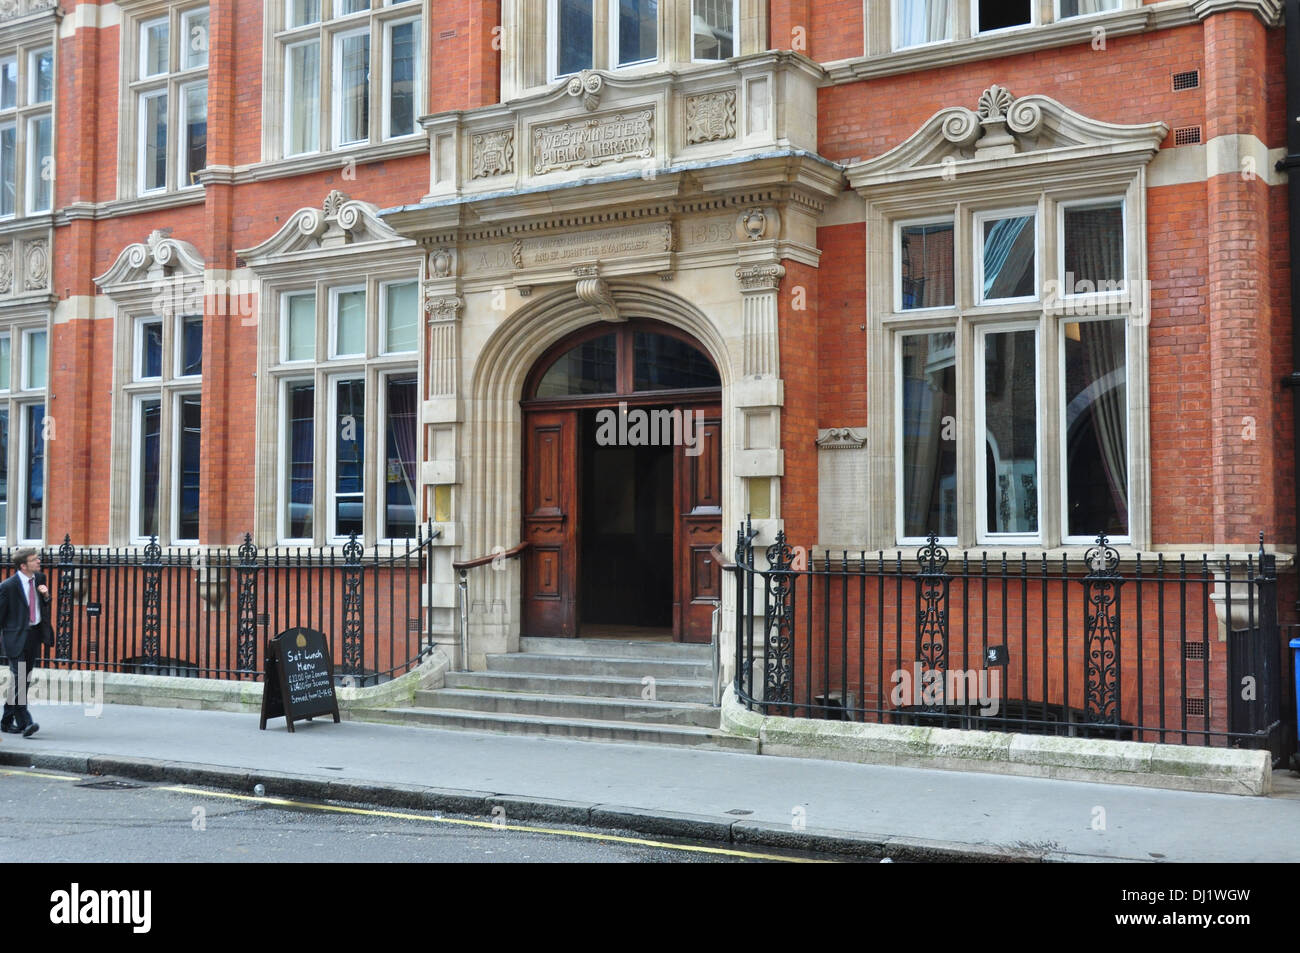 CINNAMON CLUB GT SMITH STREET LONDON UK Banque D'Images